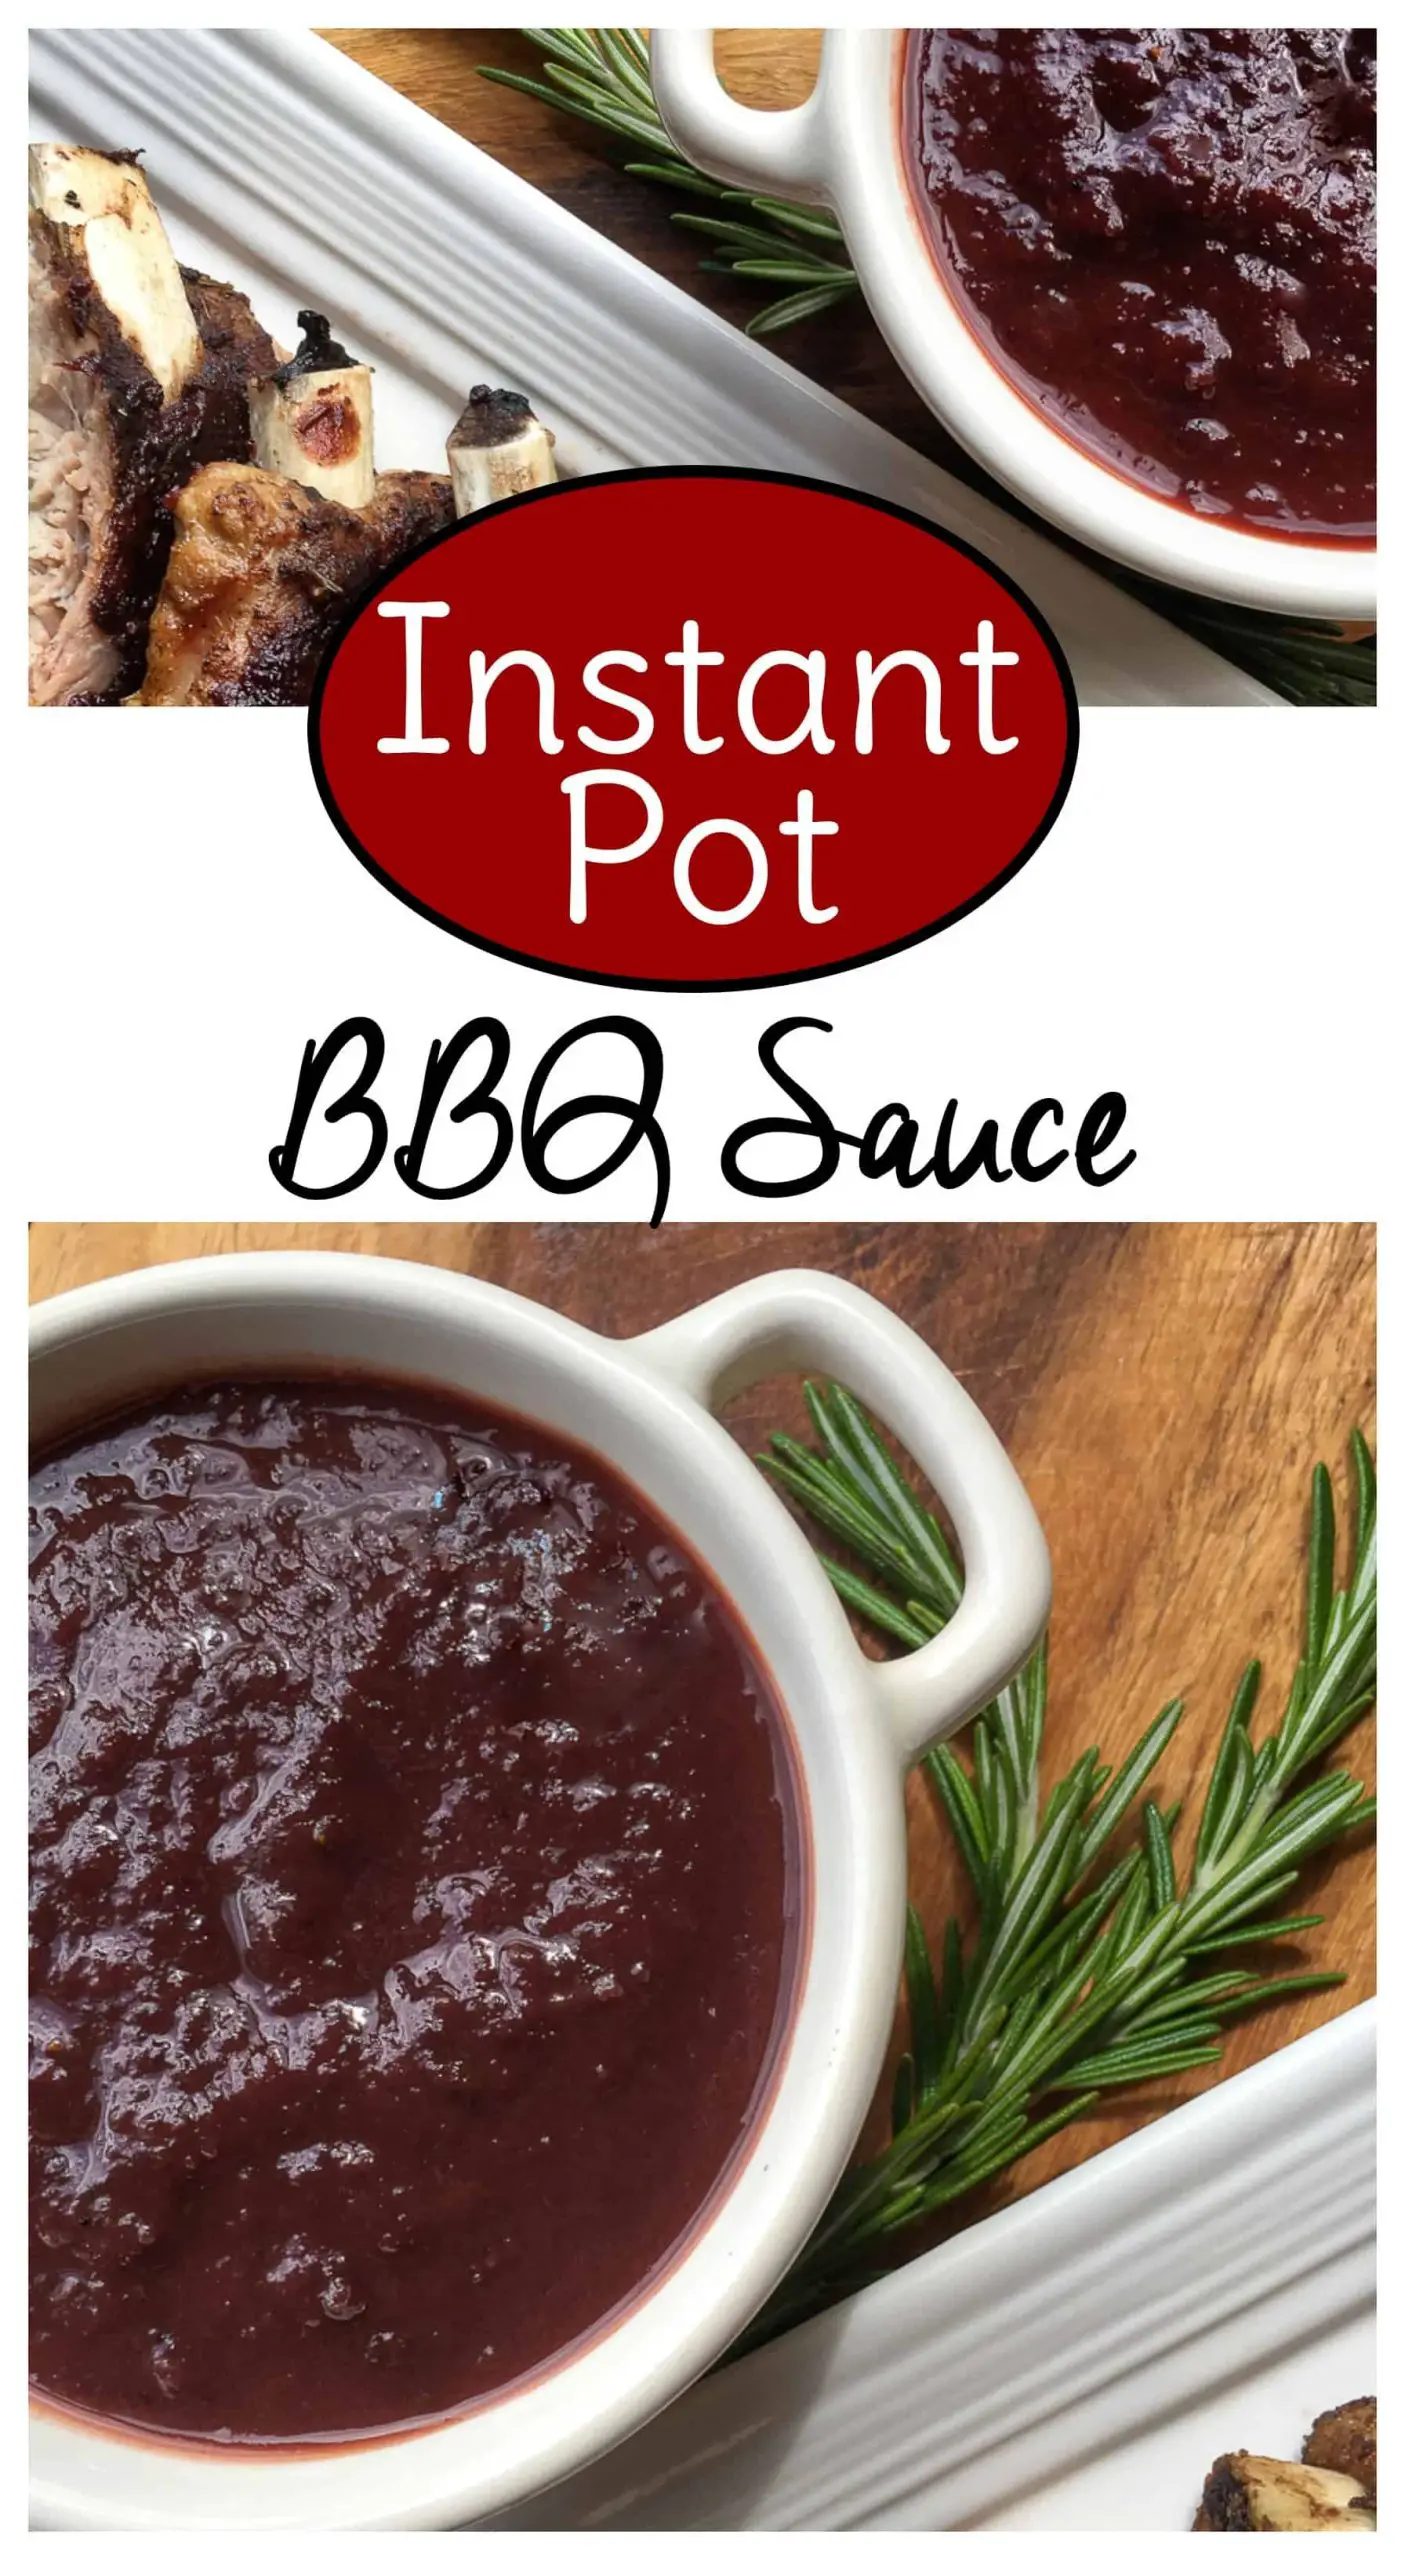 How do you make barbecue sauce? If you